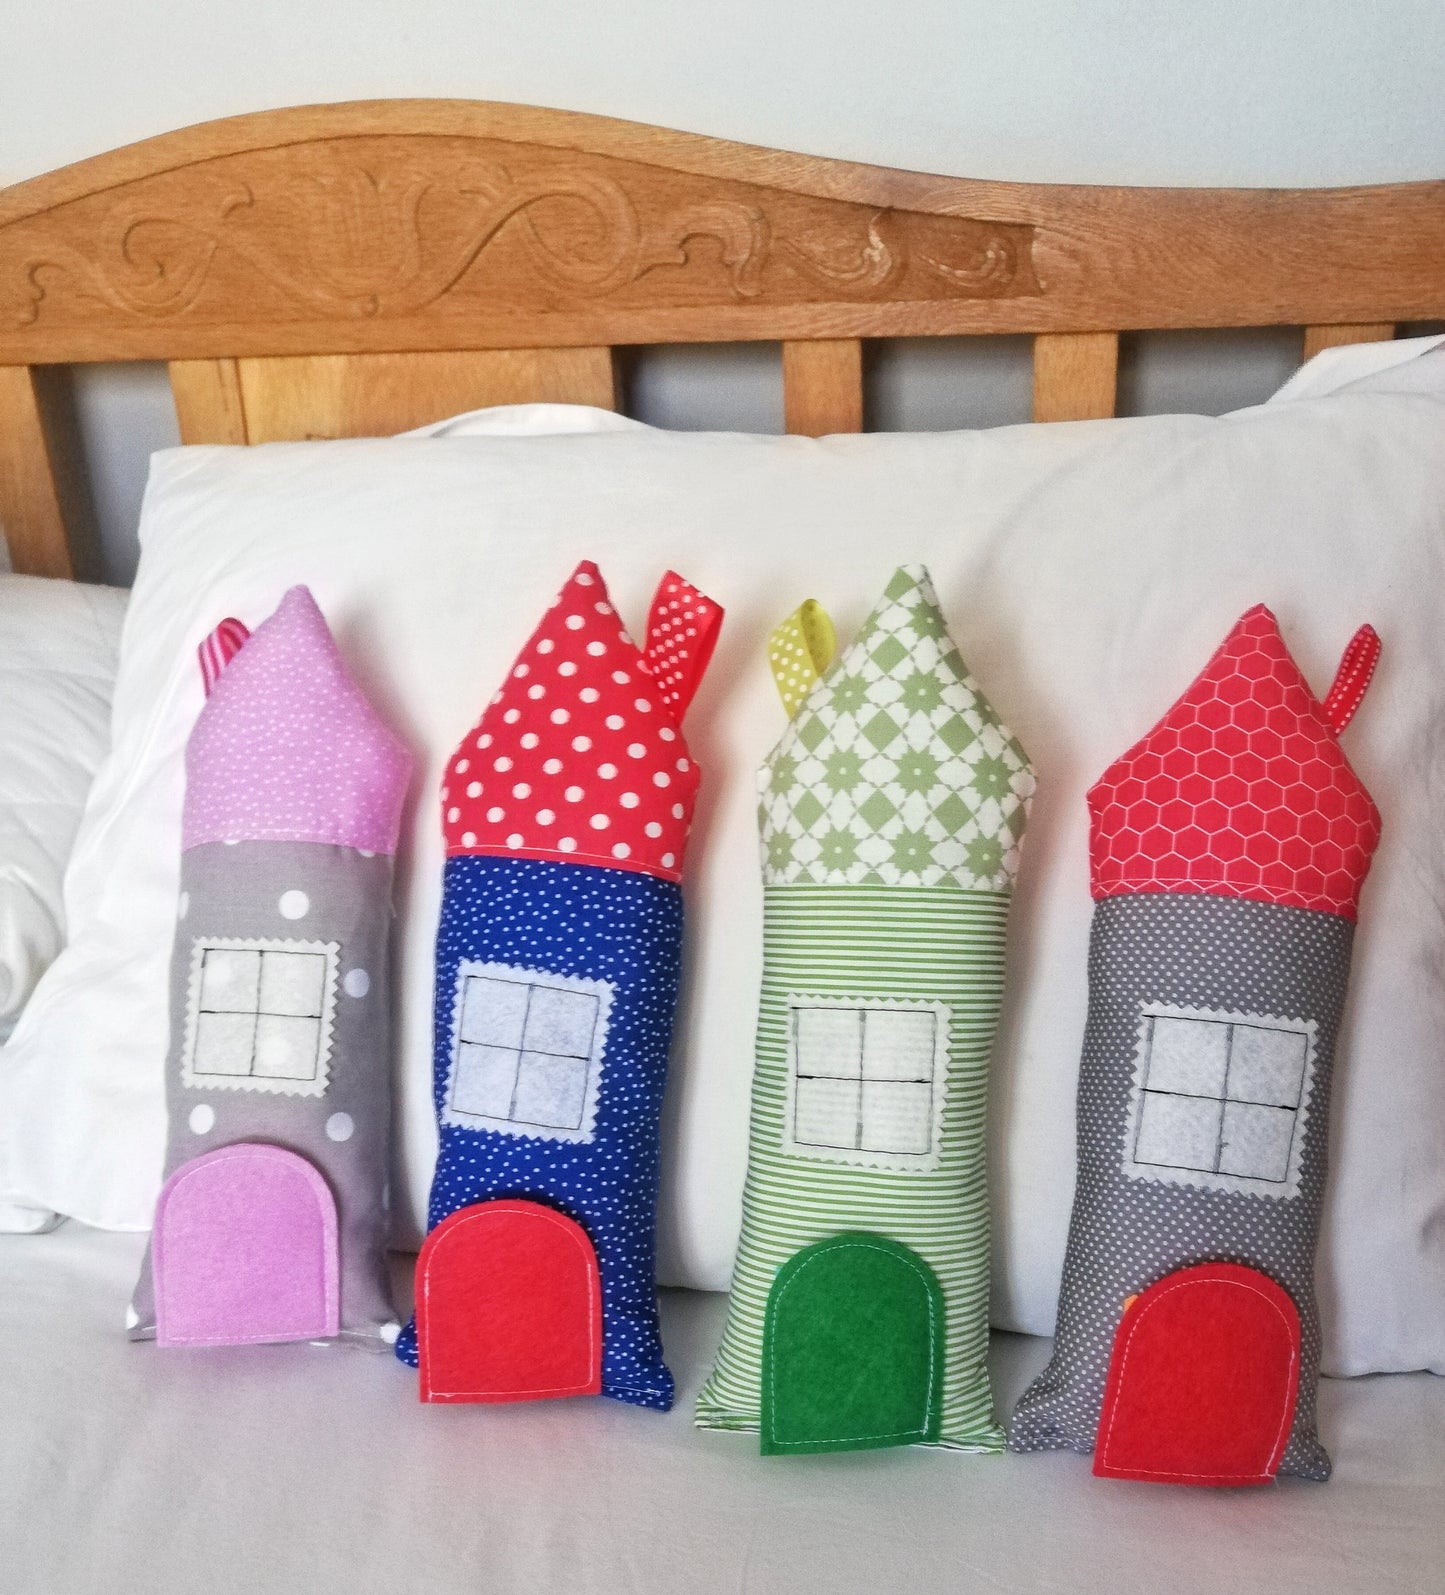 Tooth Fairy Pillow House - Navy and Red